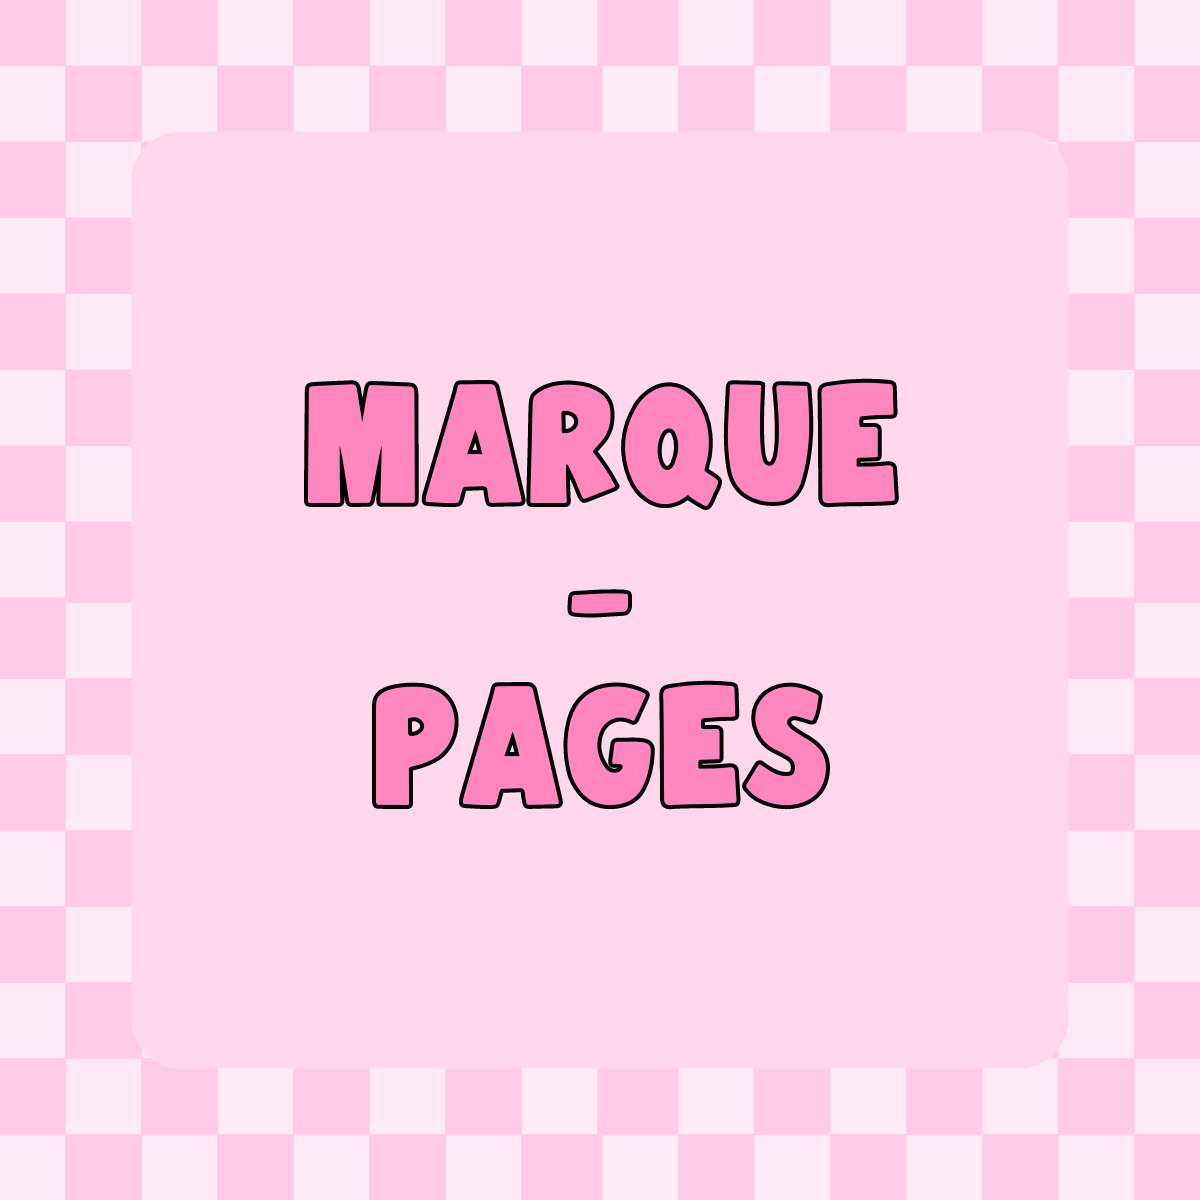 MARQUE PAGES